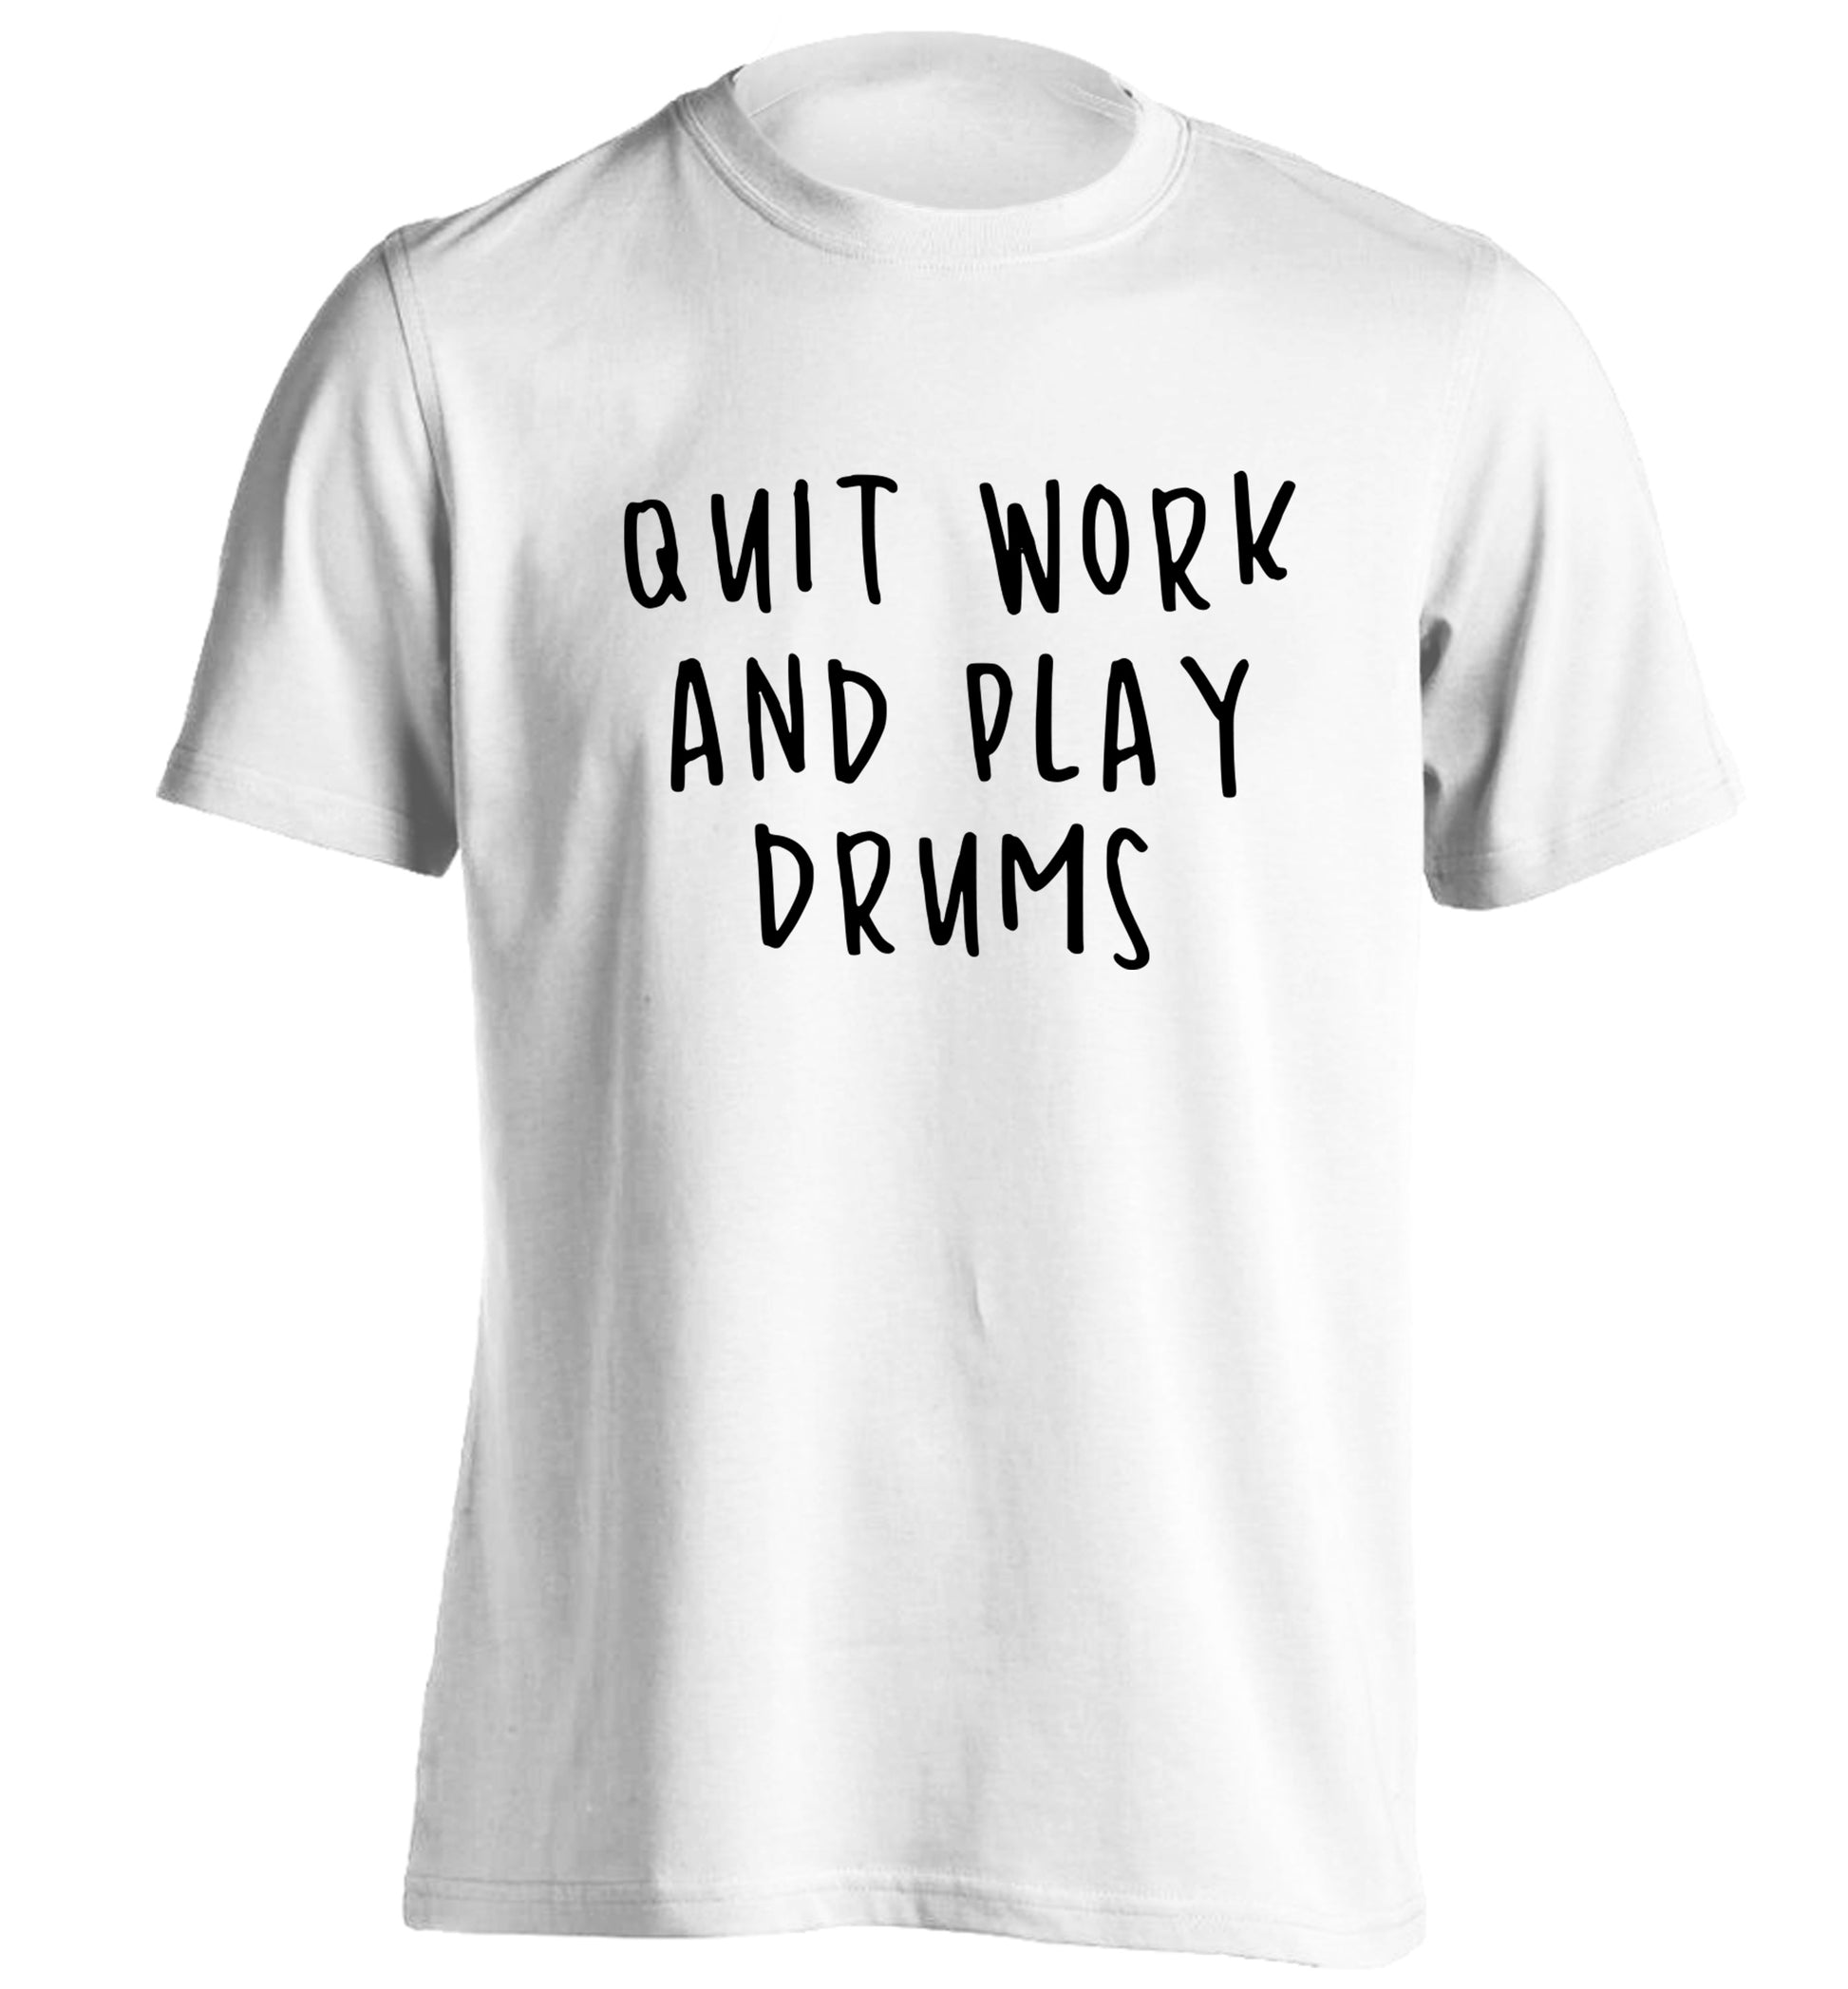 Quit work and play drums adults unisex white Tshirt 2XL